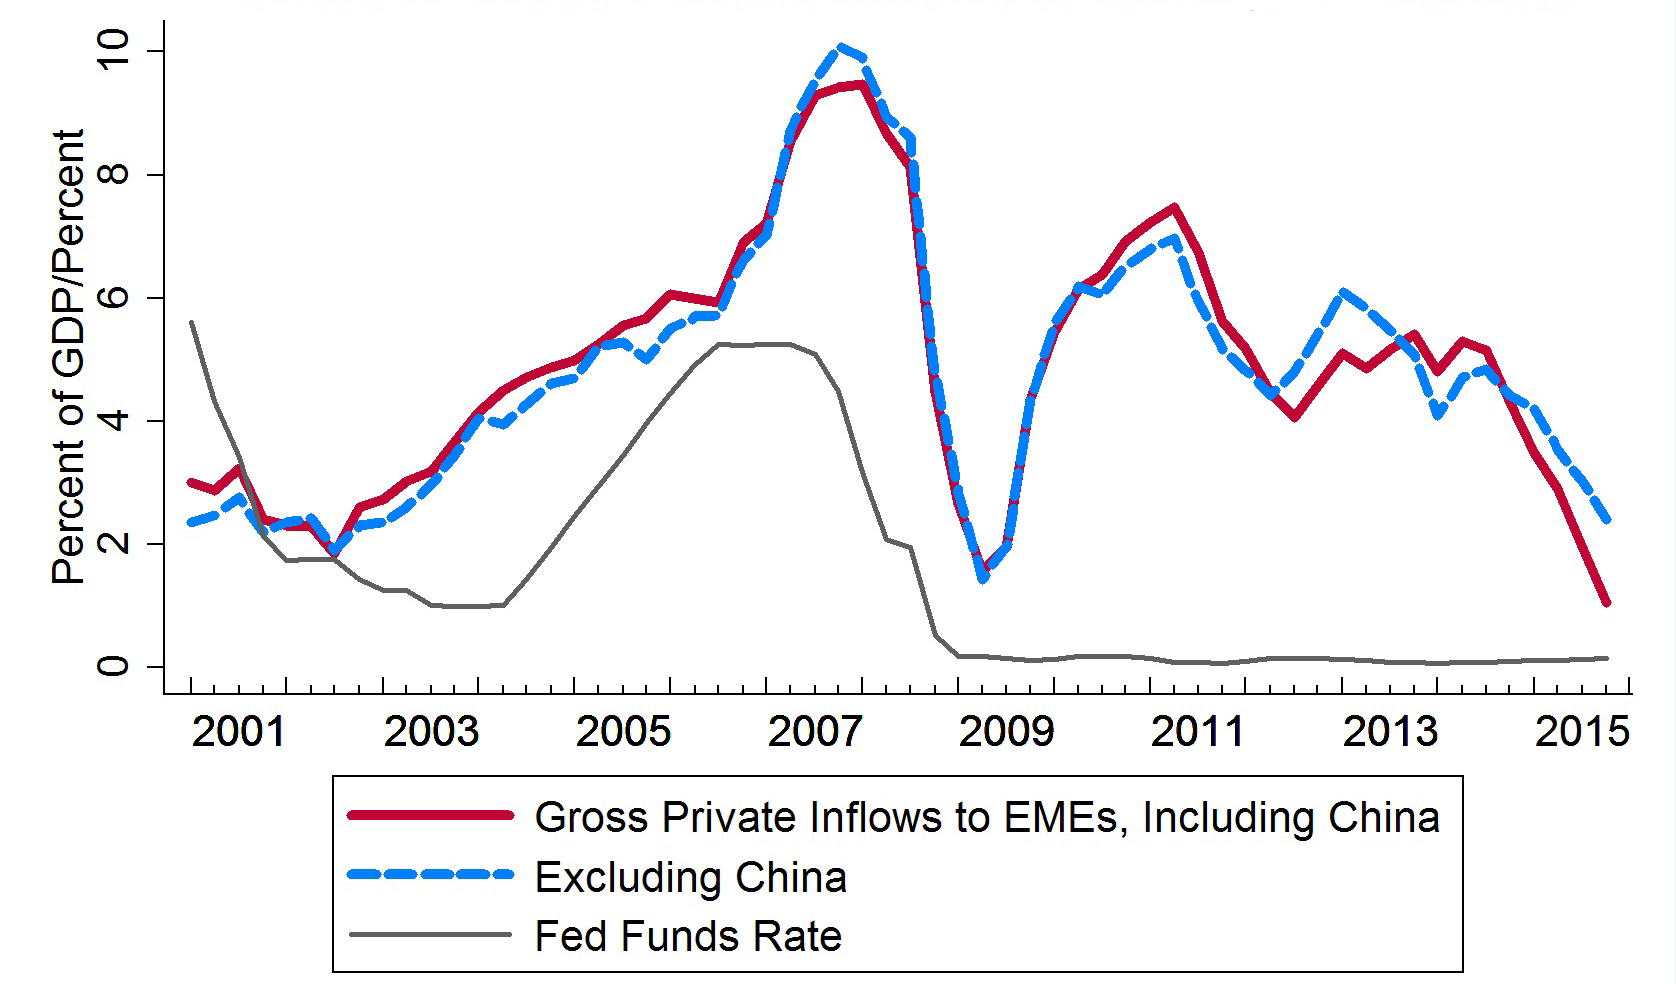 Chart 3: Gross Private Inflows to Emerging Markets. See accessible link for data.